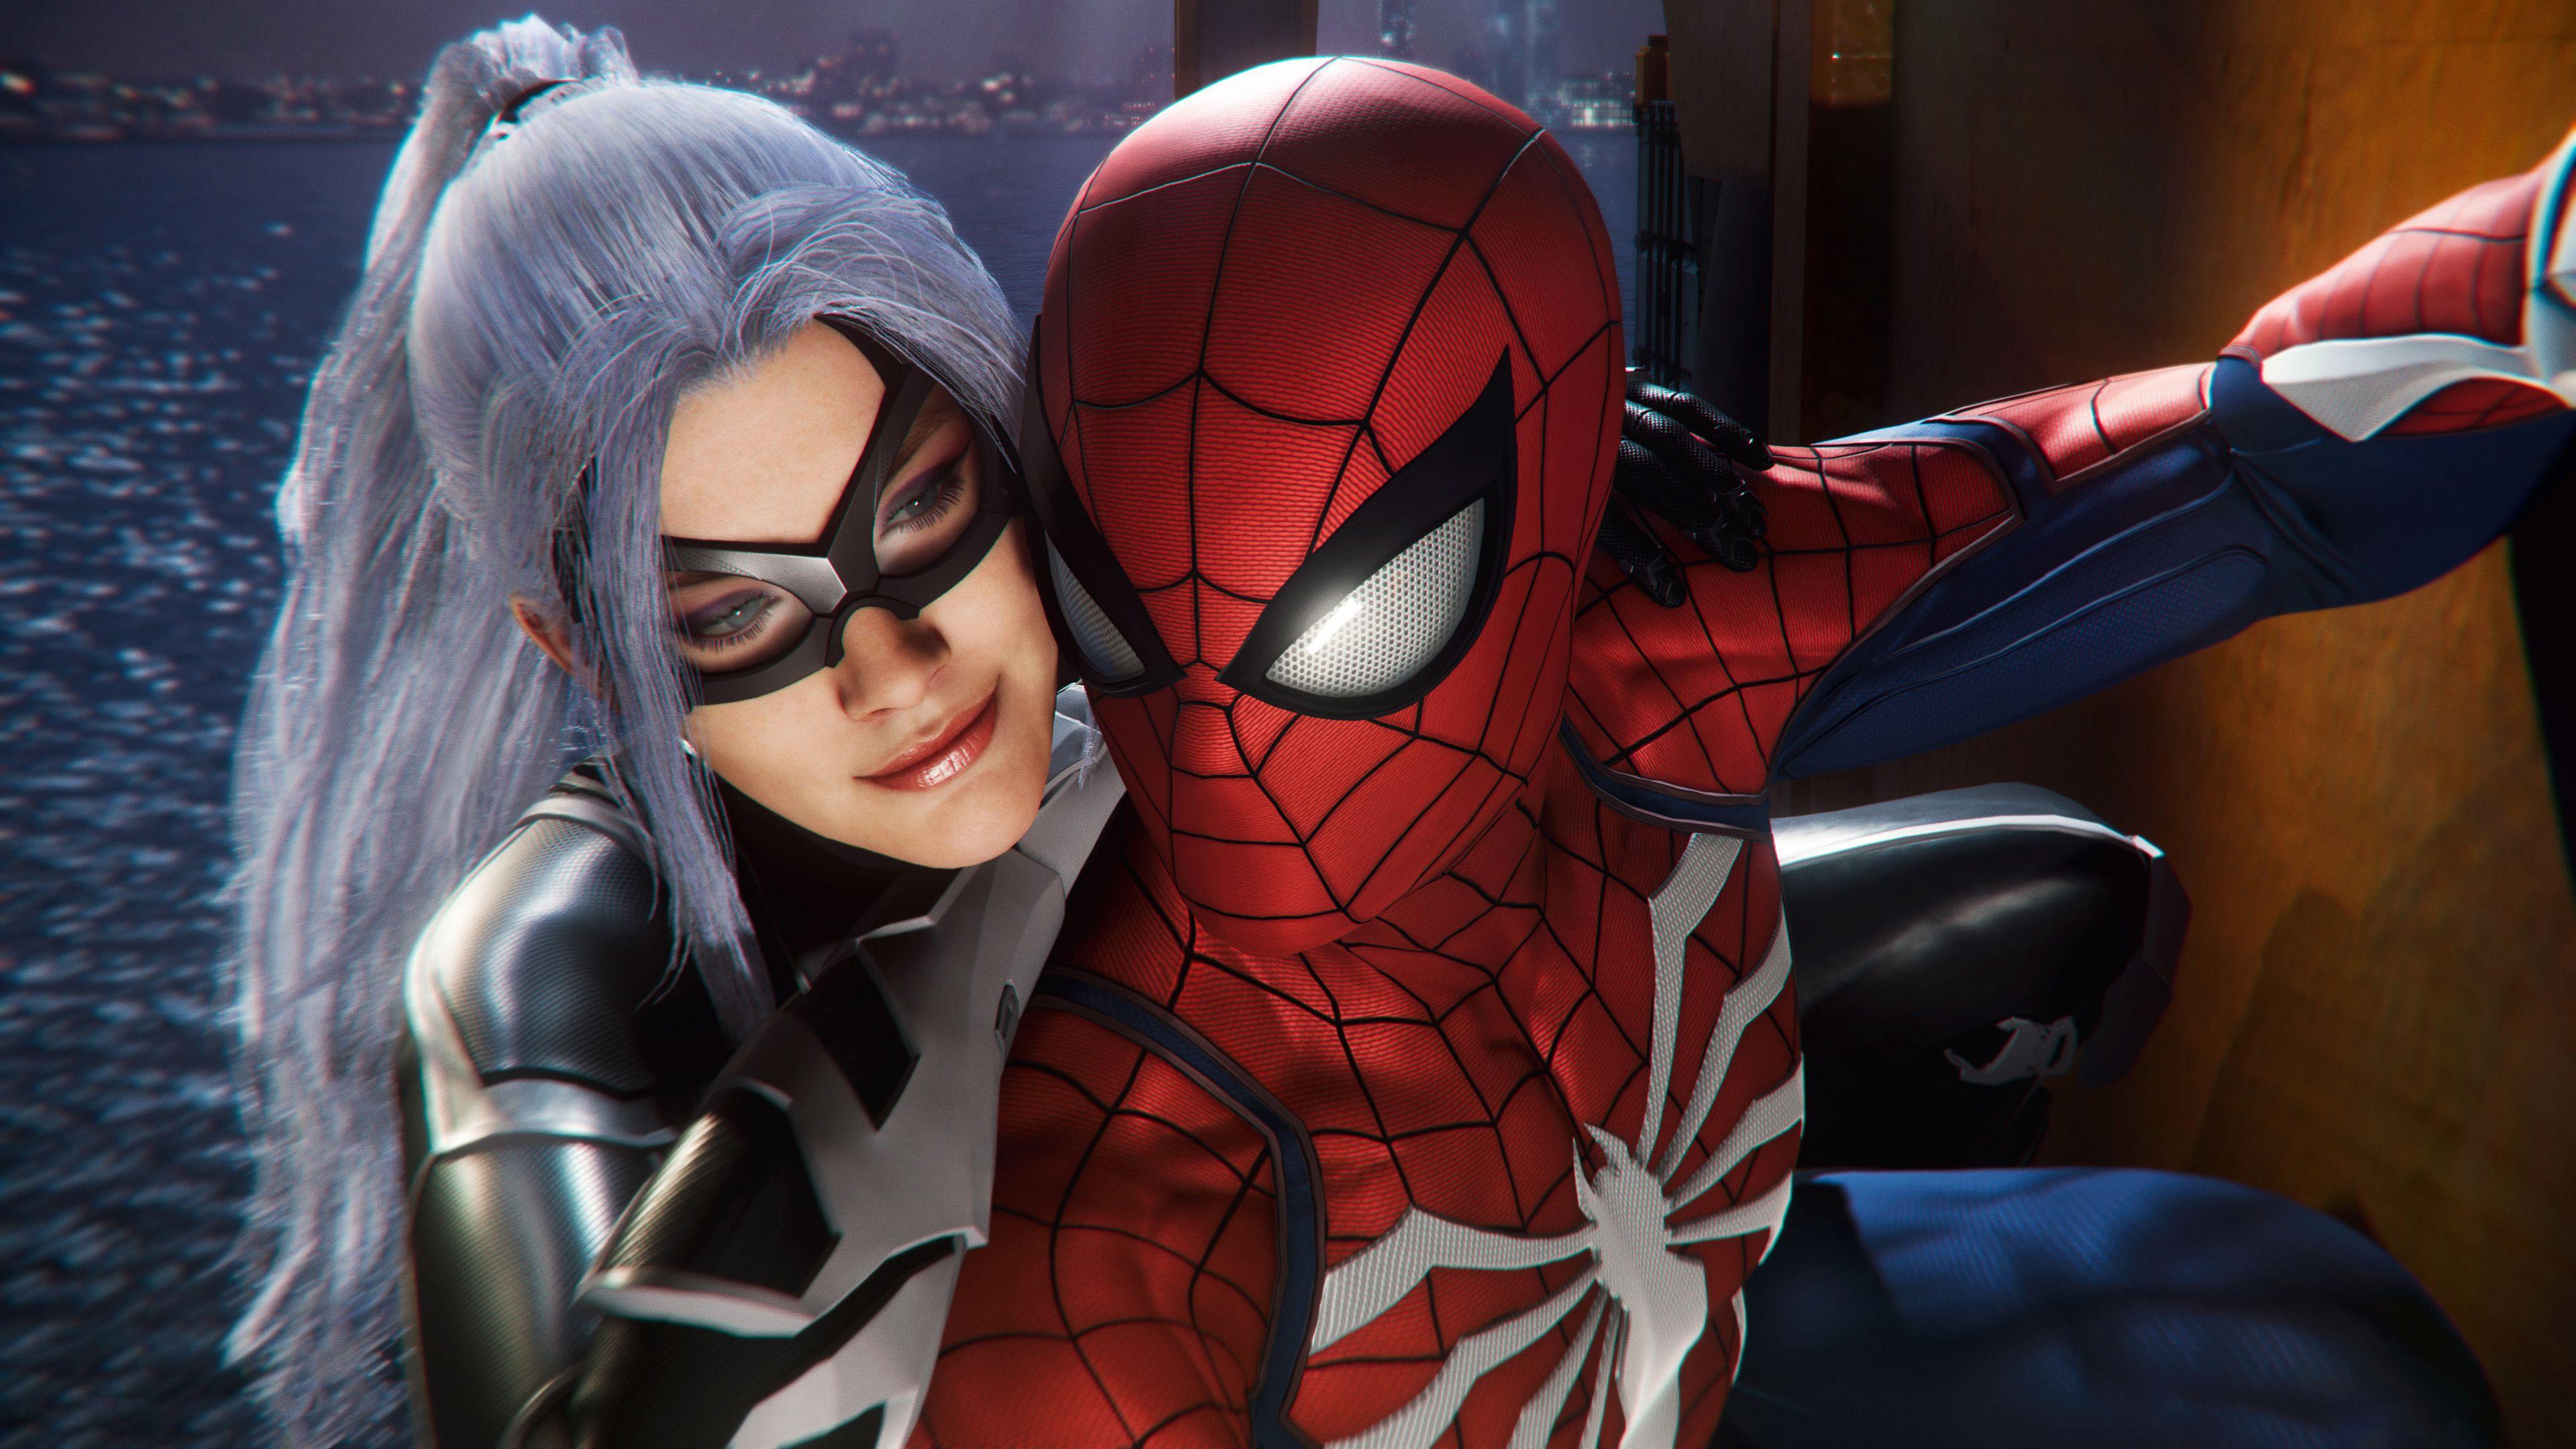 Spider Man Ps4 Wallpaper Hug With Girl